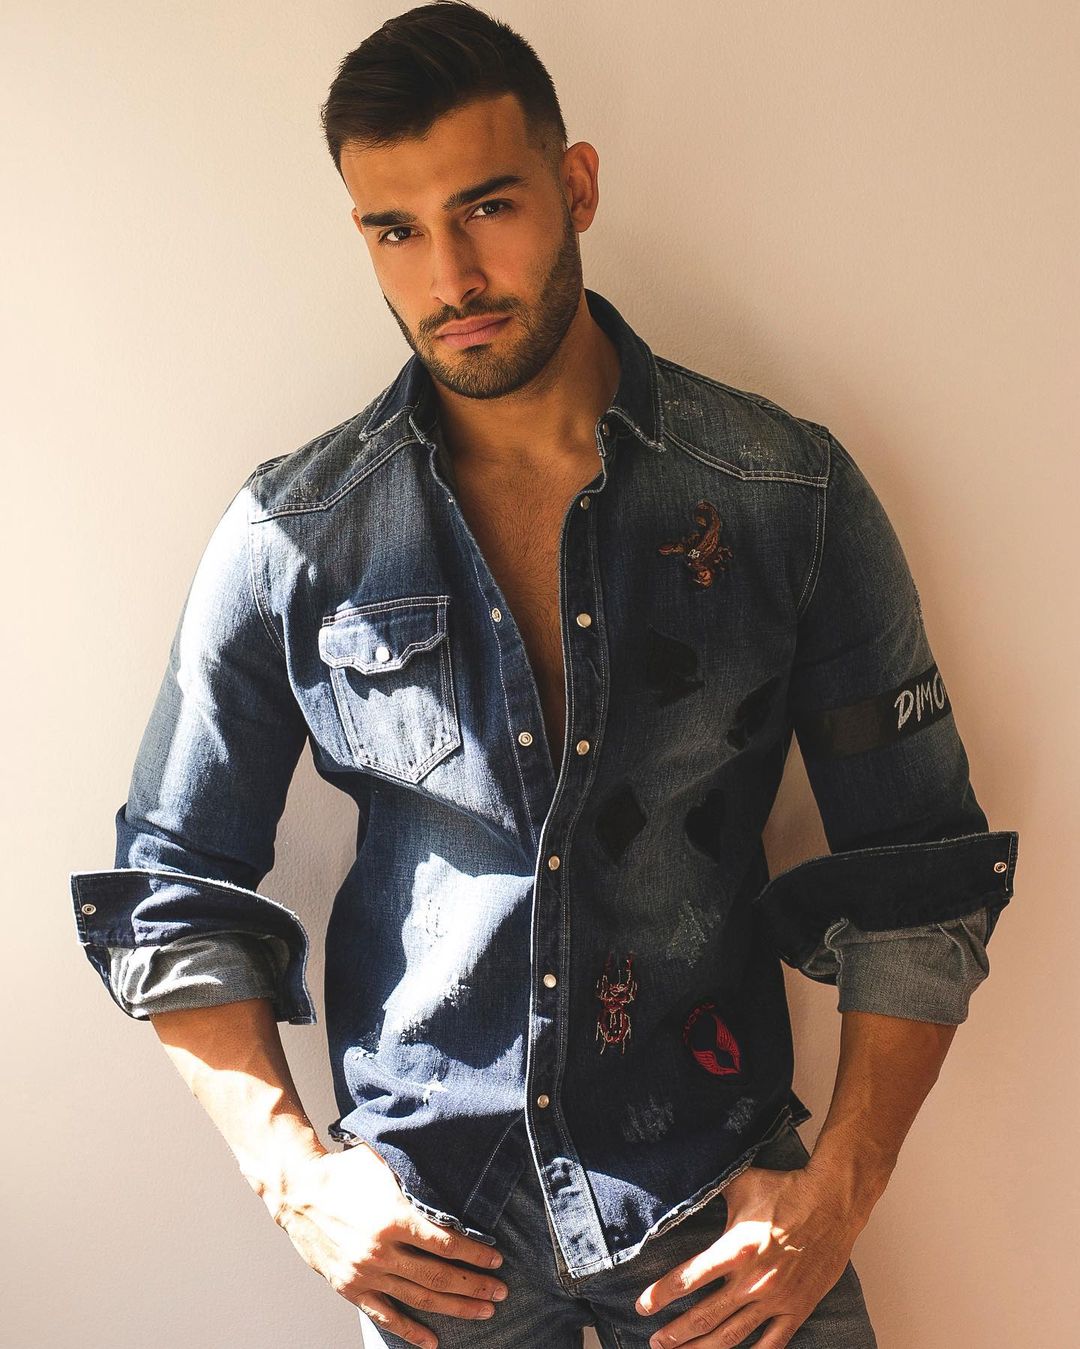 Sam AsghariWest Age, Height, Wife, Family – Biographyprofiles